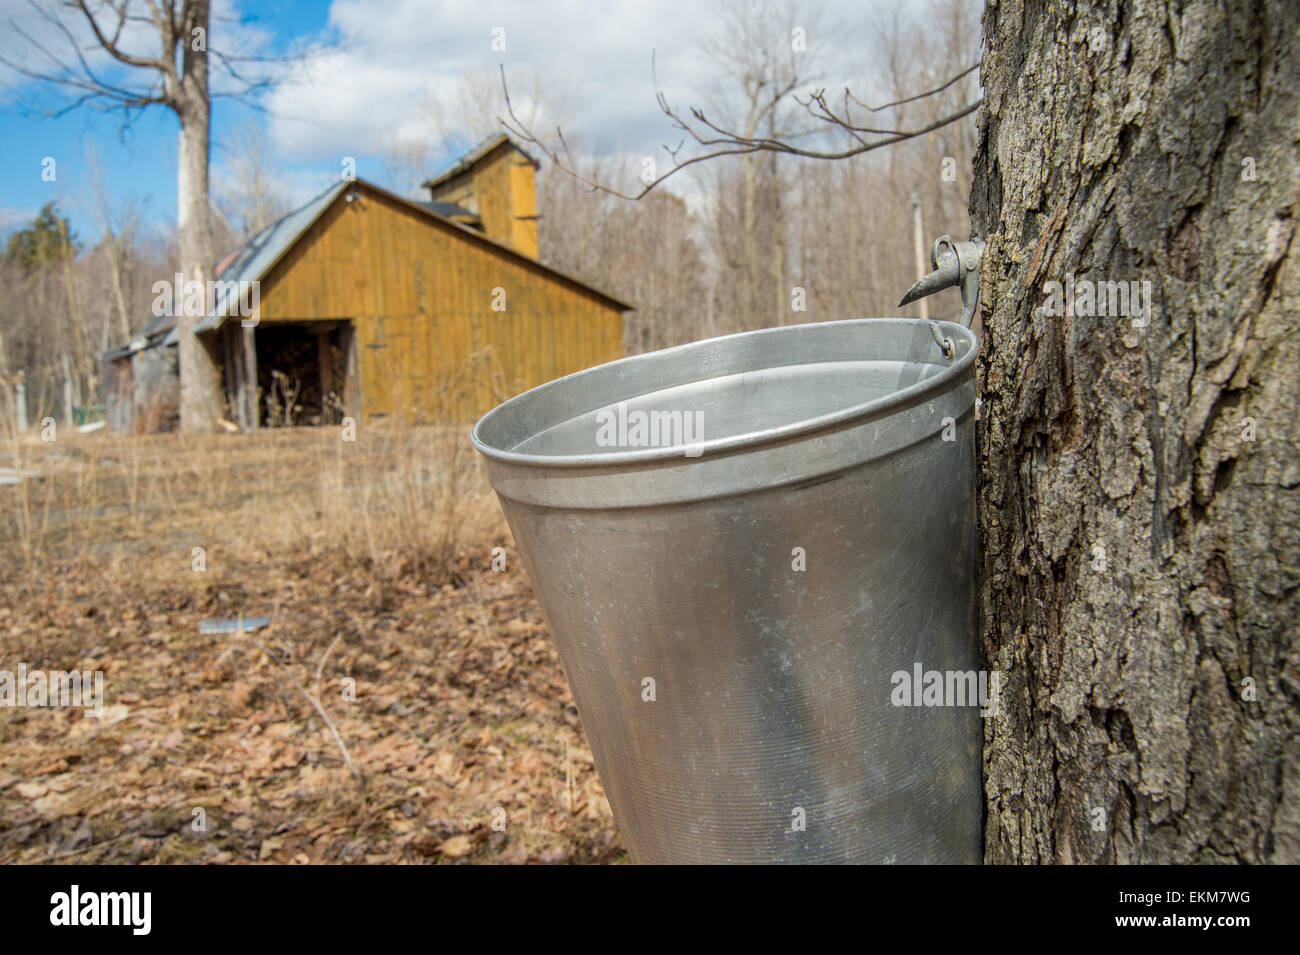 Pail used to collect sap of maple trees to produce maple syrup in Quebec. Stock Photo